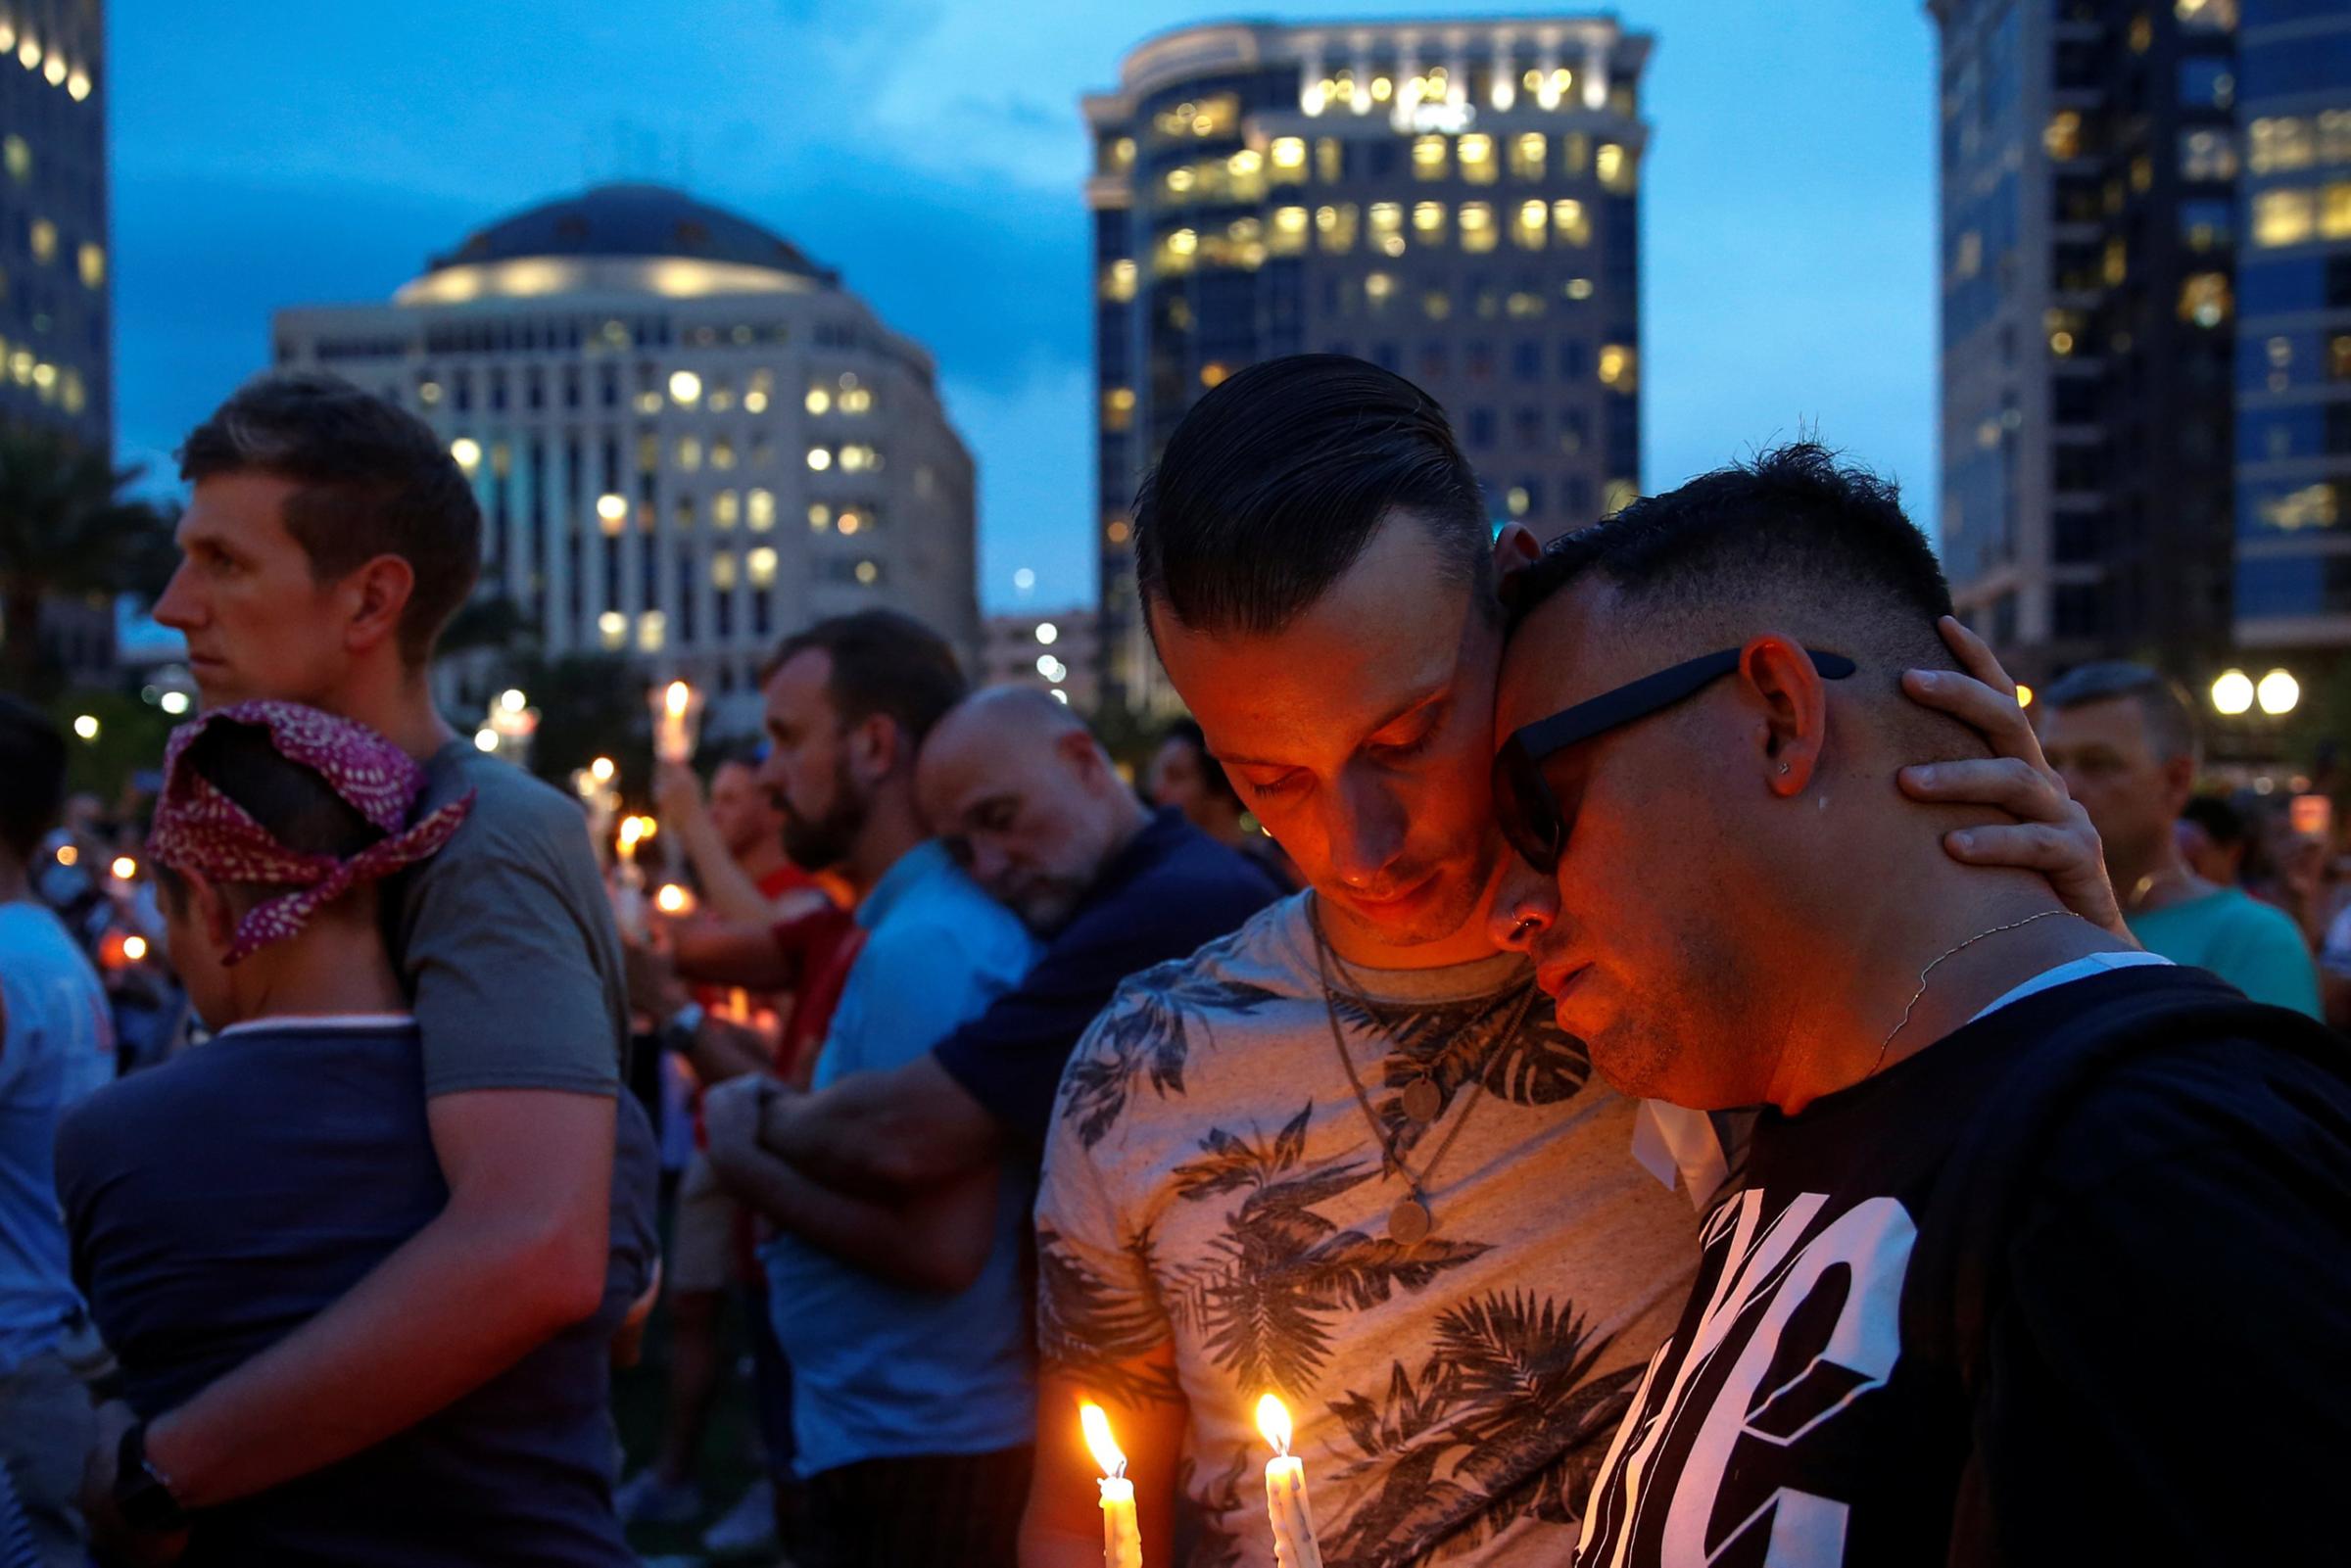 Men embrace during a candle light vigil in memory of victims one day after a mass shooting at the Pulse gay night club in Orlando on June 13, 2016.